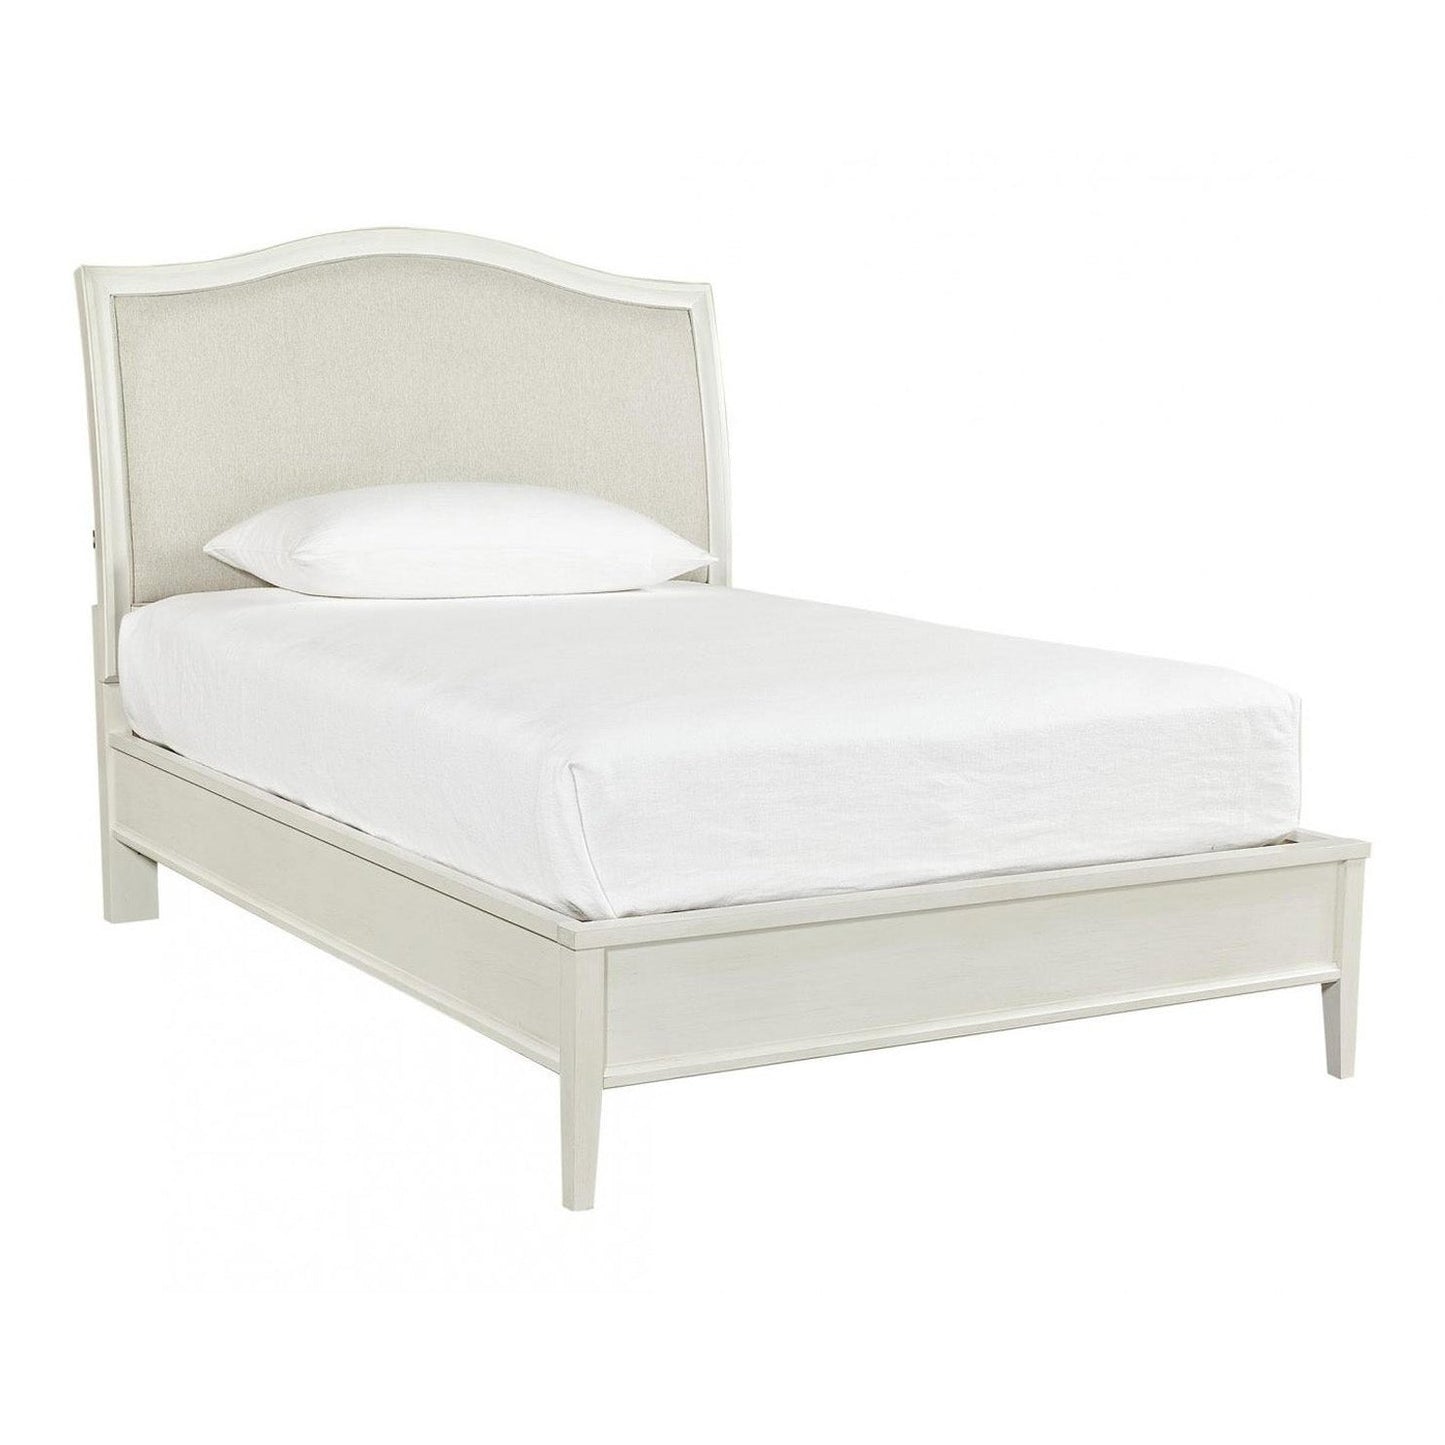 CHARLOTTE DOUBLE BED